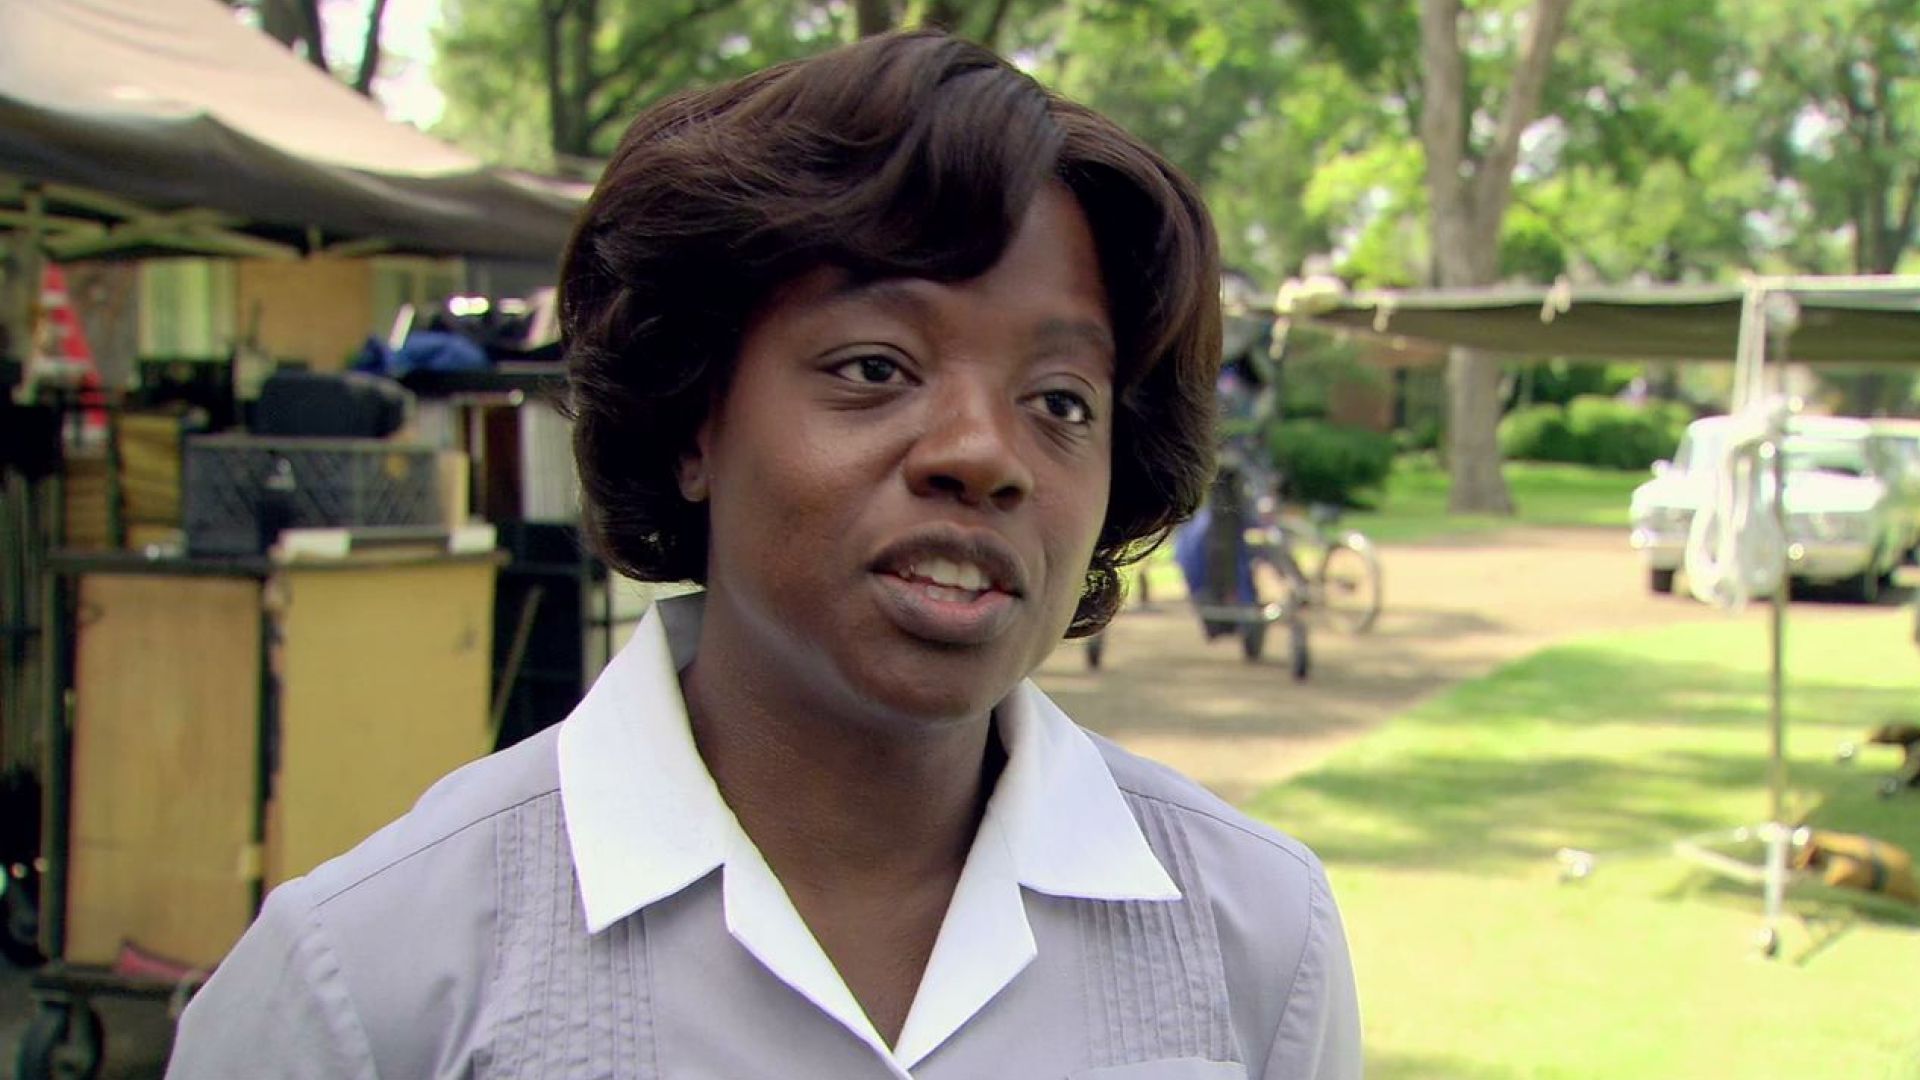 Viola Davis talks about her character Aibileen in The Help